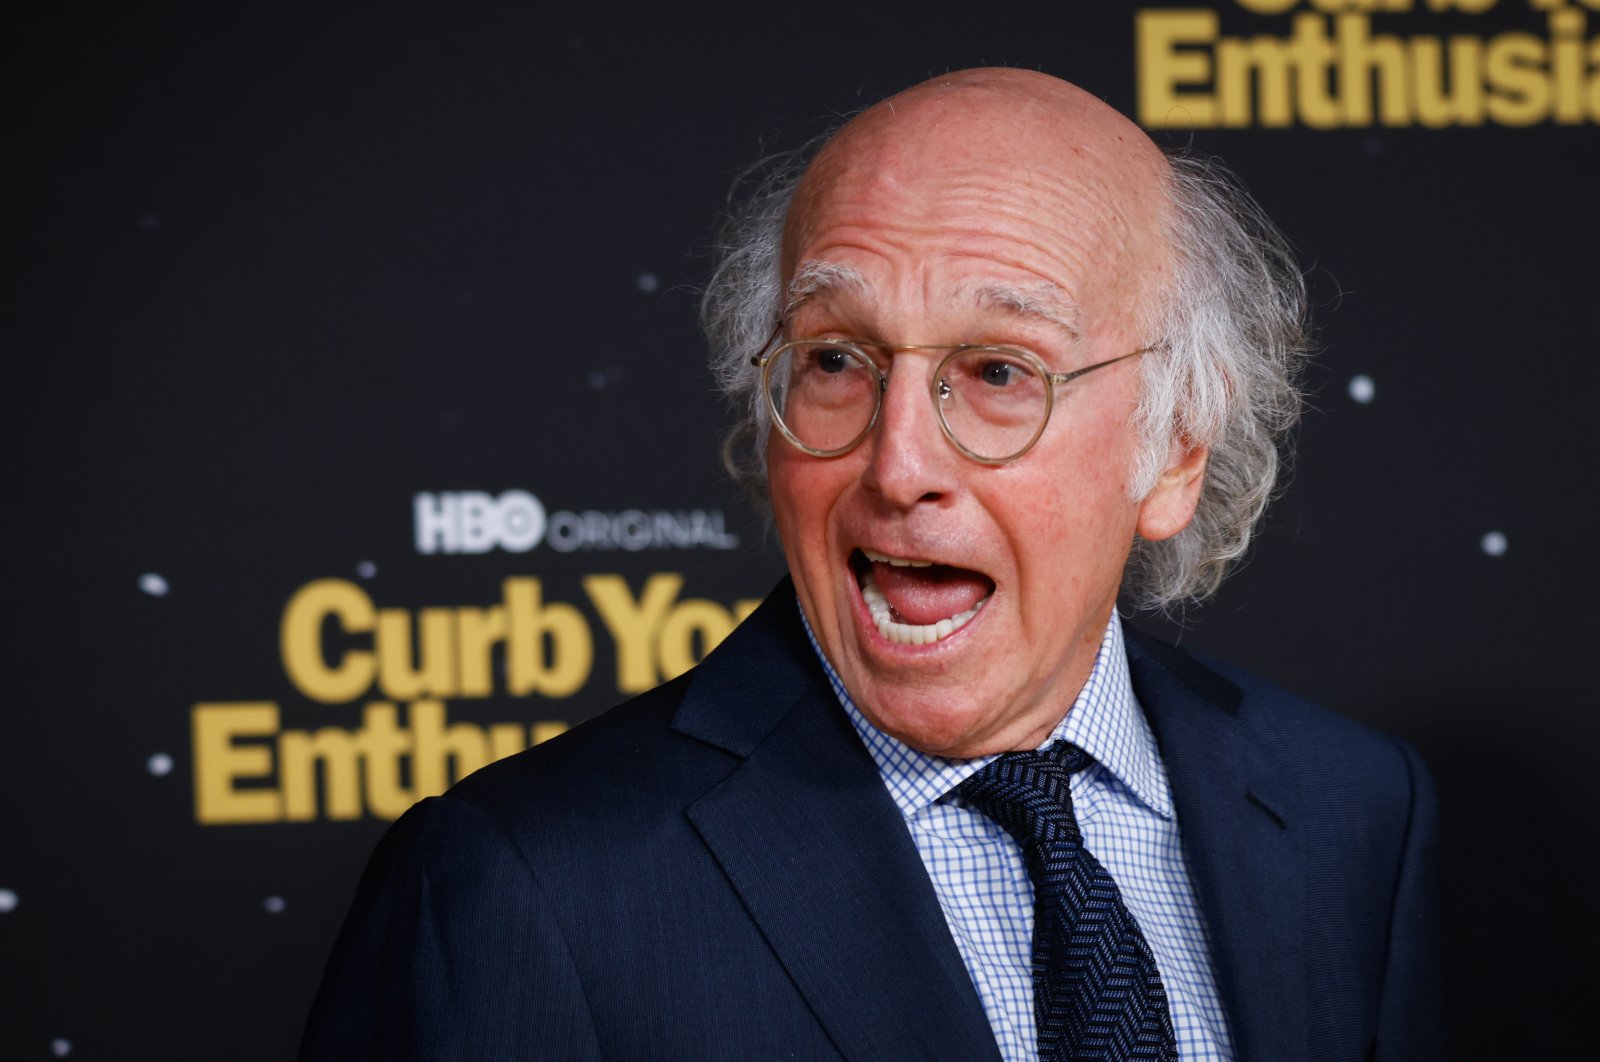 TV Show ‘Curb Your Enthusiasm’ back in post-pandemic setting | Daily Sabah